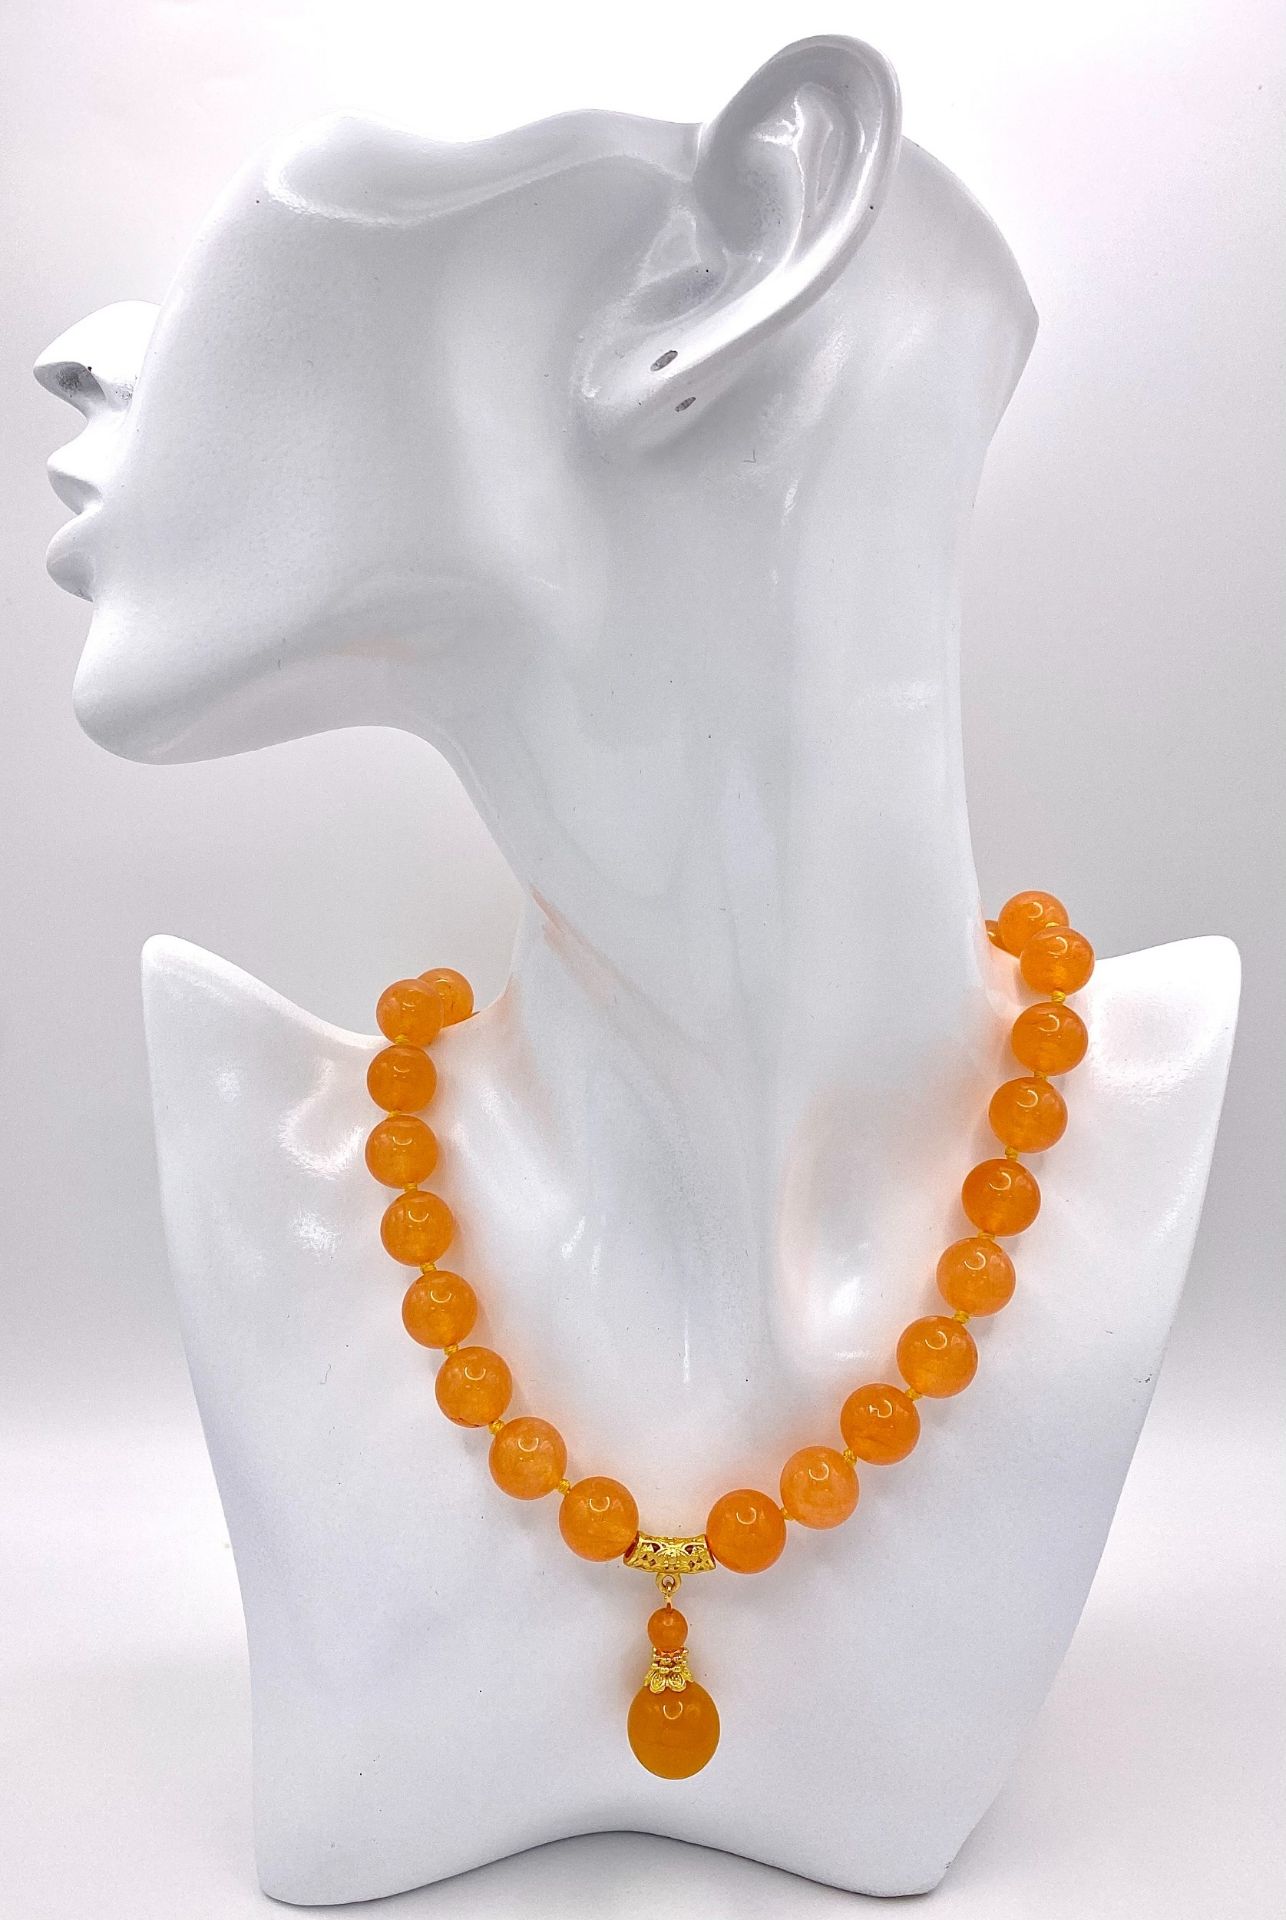 A Summery Orange Jade Beaded Necklace with Drop Pendant. 12mm beads. Gilded accents and clasp. 3.